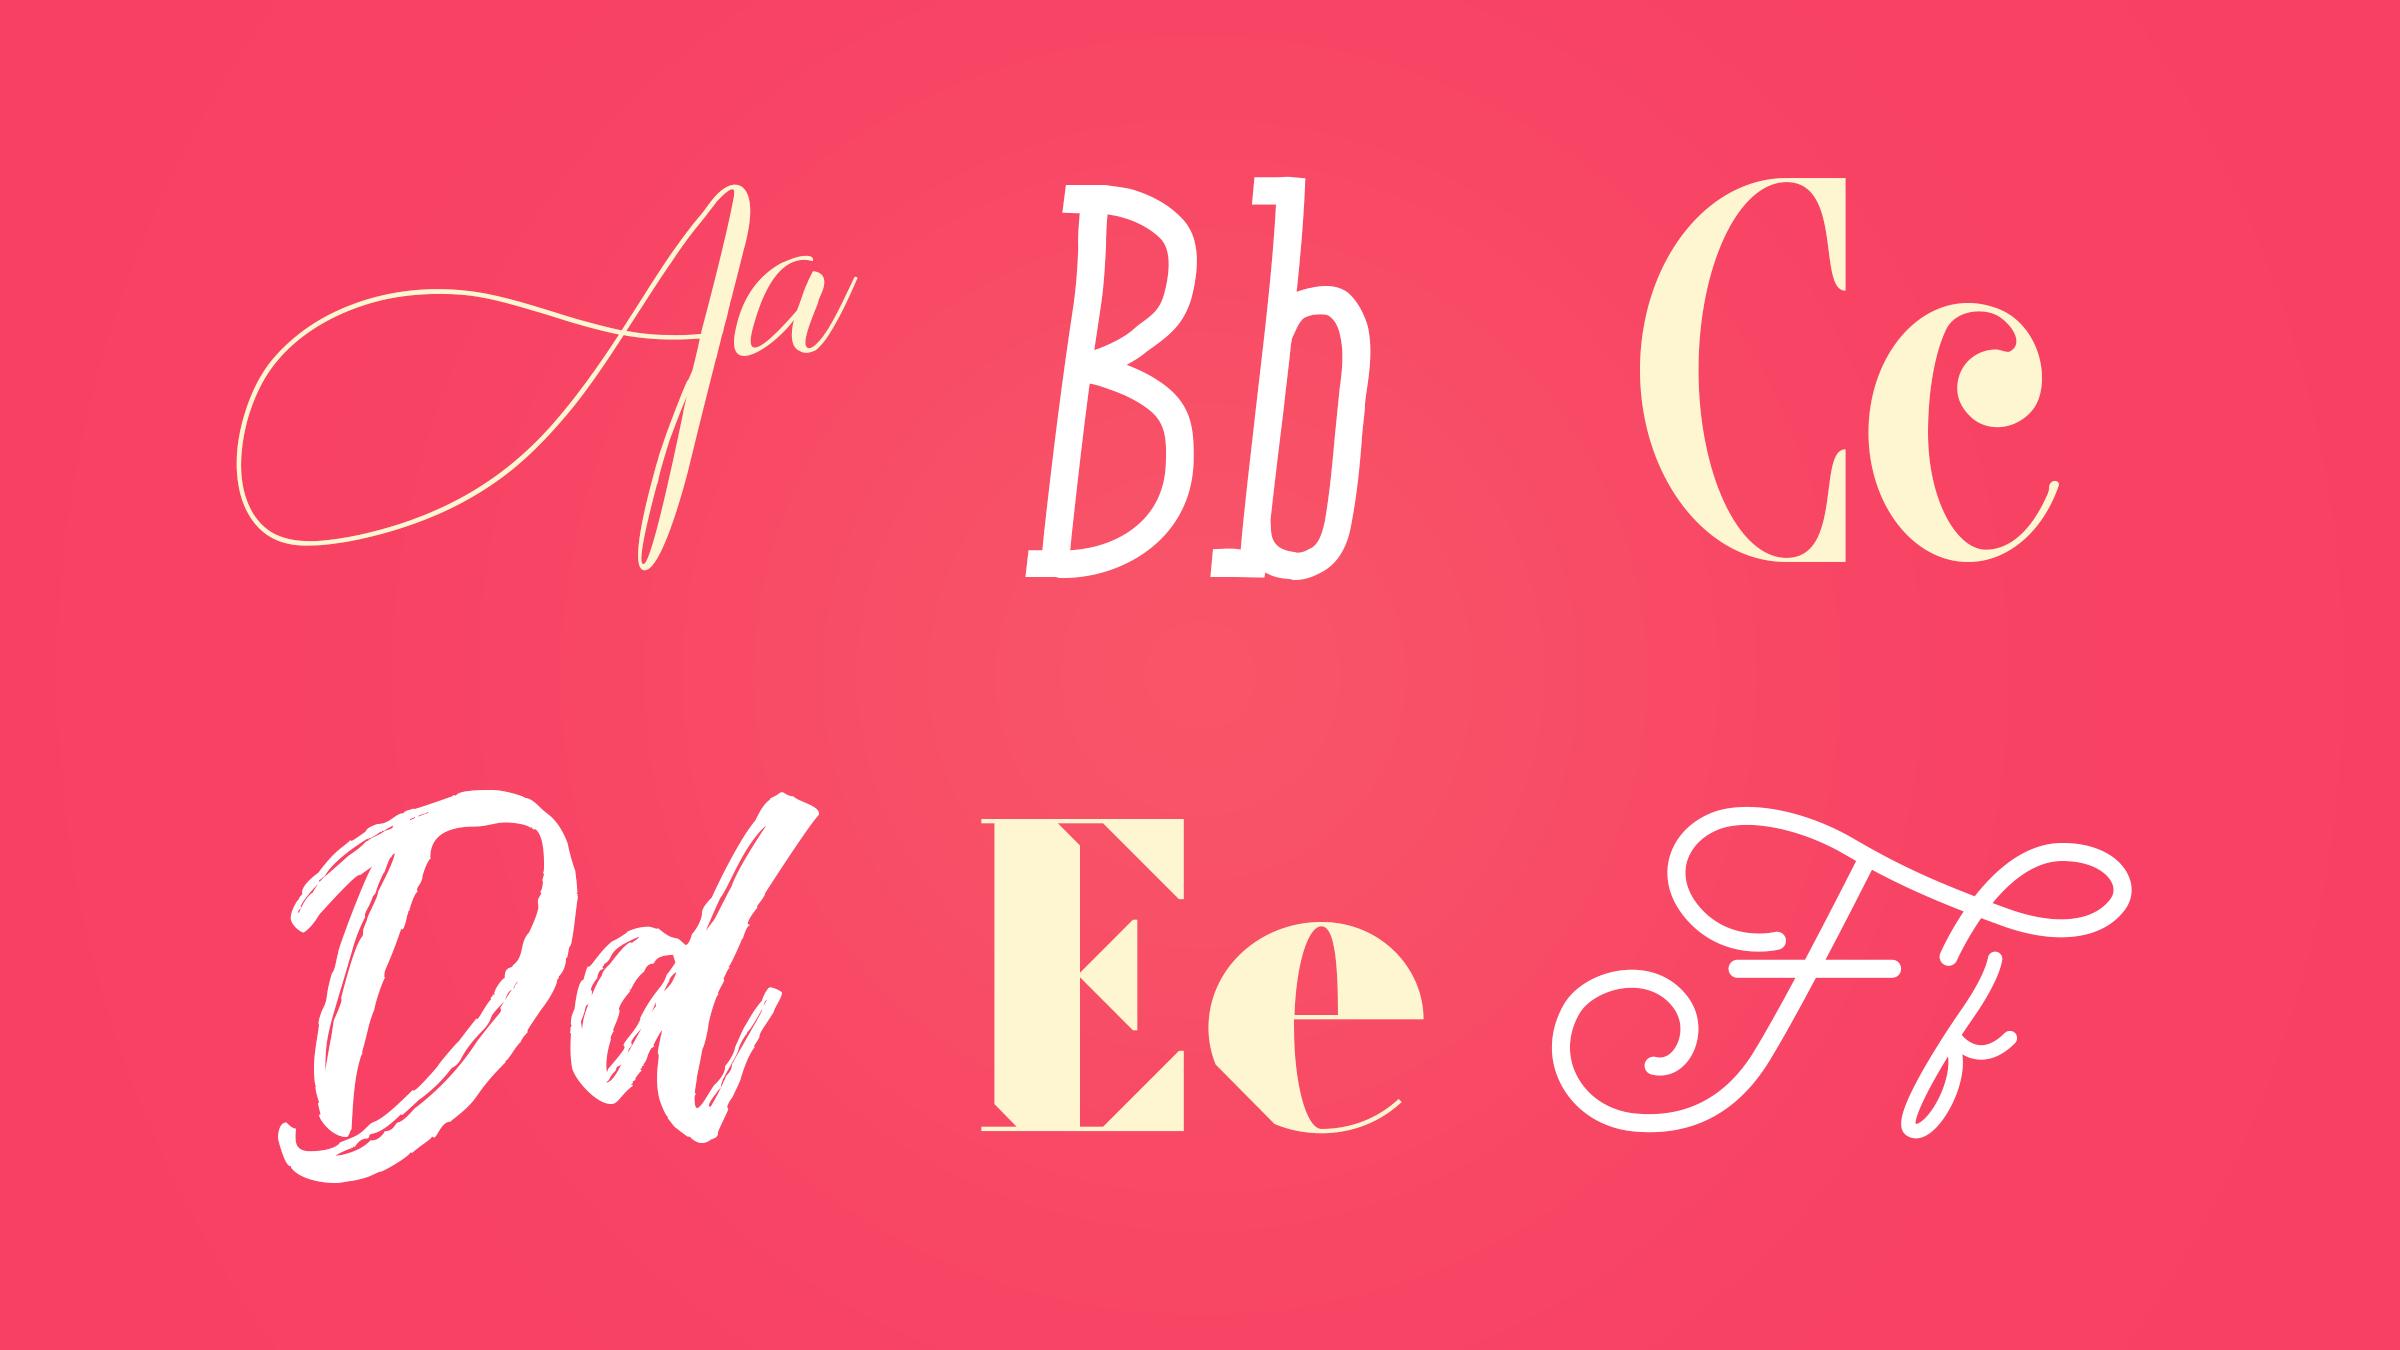 Top 10 Best New Fonts For Your 2021 Design Toolbox - Design